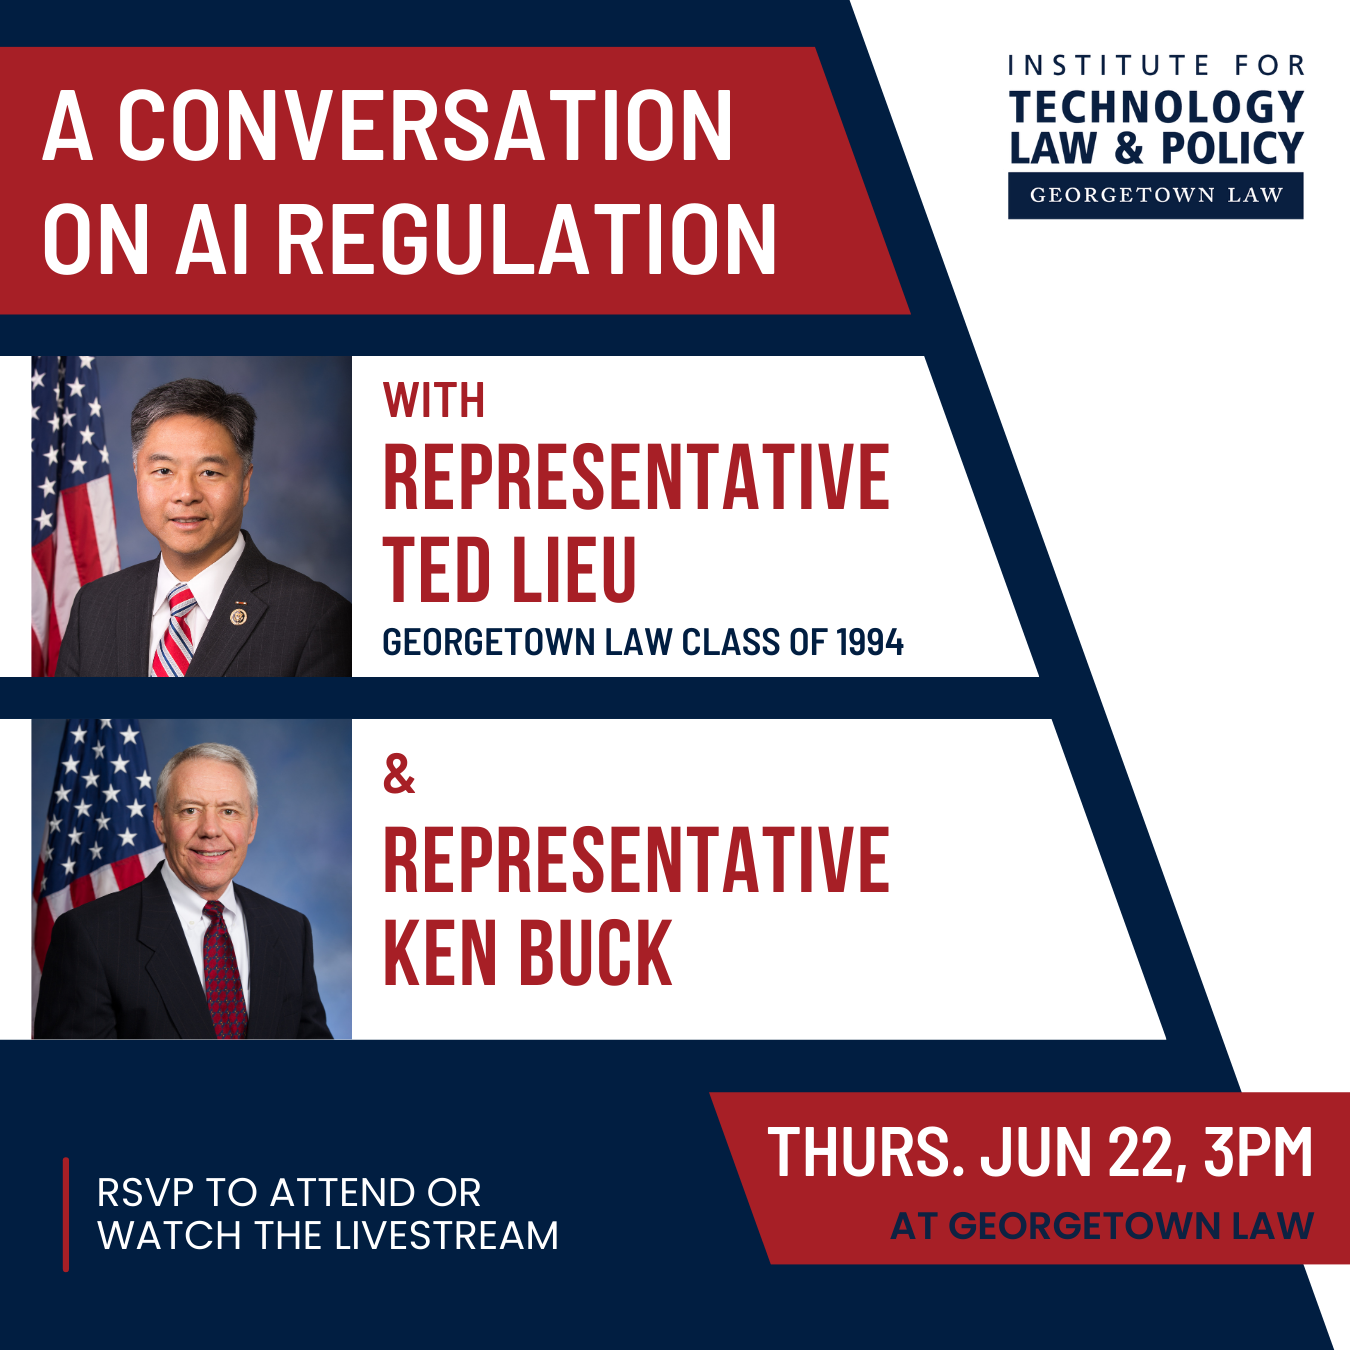 A Institute For Technology Law and Policy Event Flyer which states: Conversation On AI Regulation with Representative Ted Lieu Georgetown Law Class of 1984. And Representative Ken Buck. RSVP TO ATTEND OR WATCH THE LIVESTREAM. Date: Thursday, June 22, 2023 Time: 3:00 PM Location: Georgetown Law